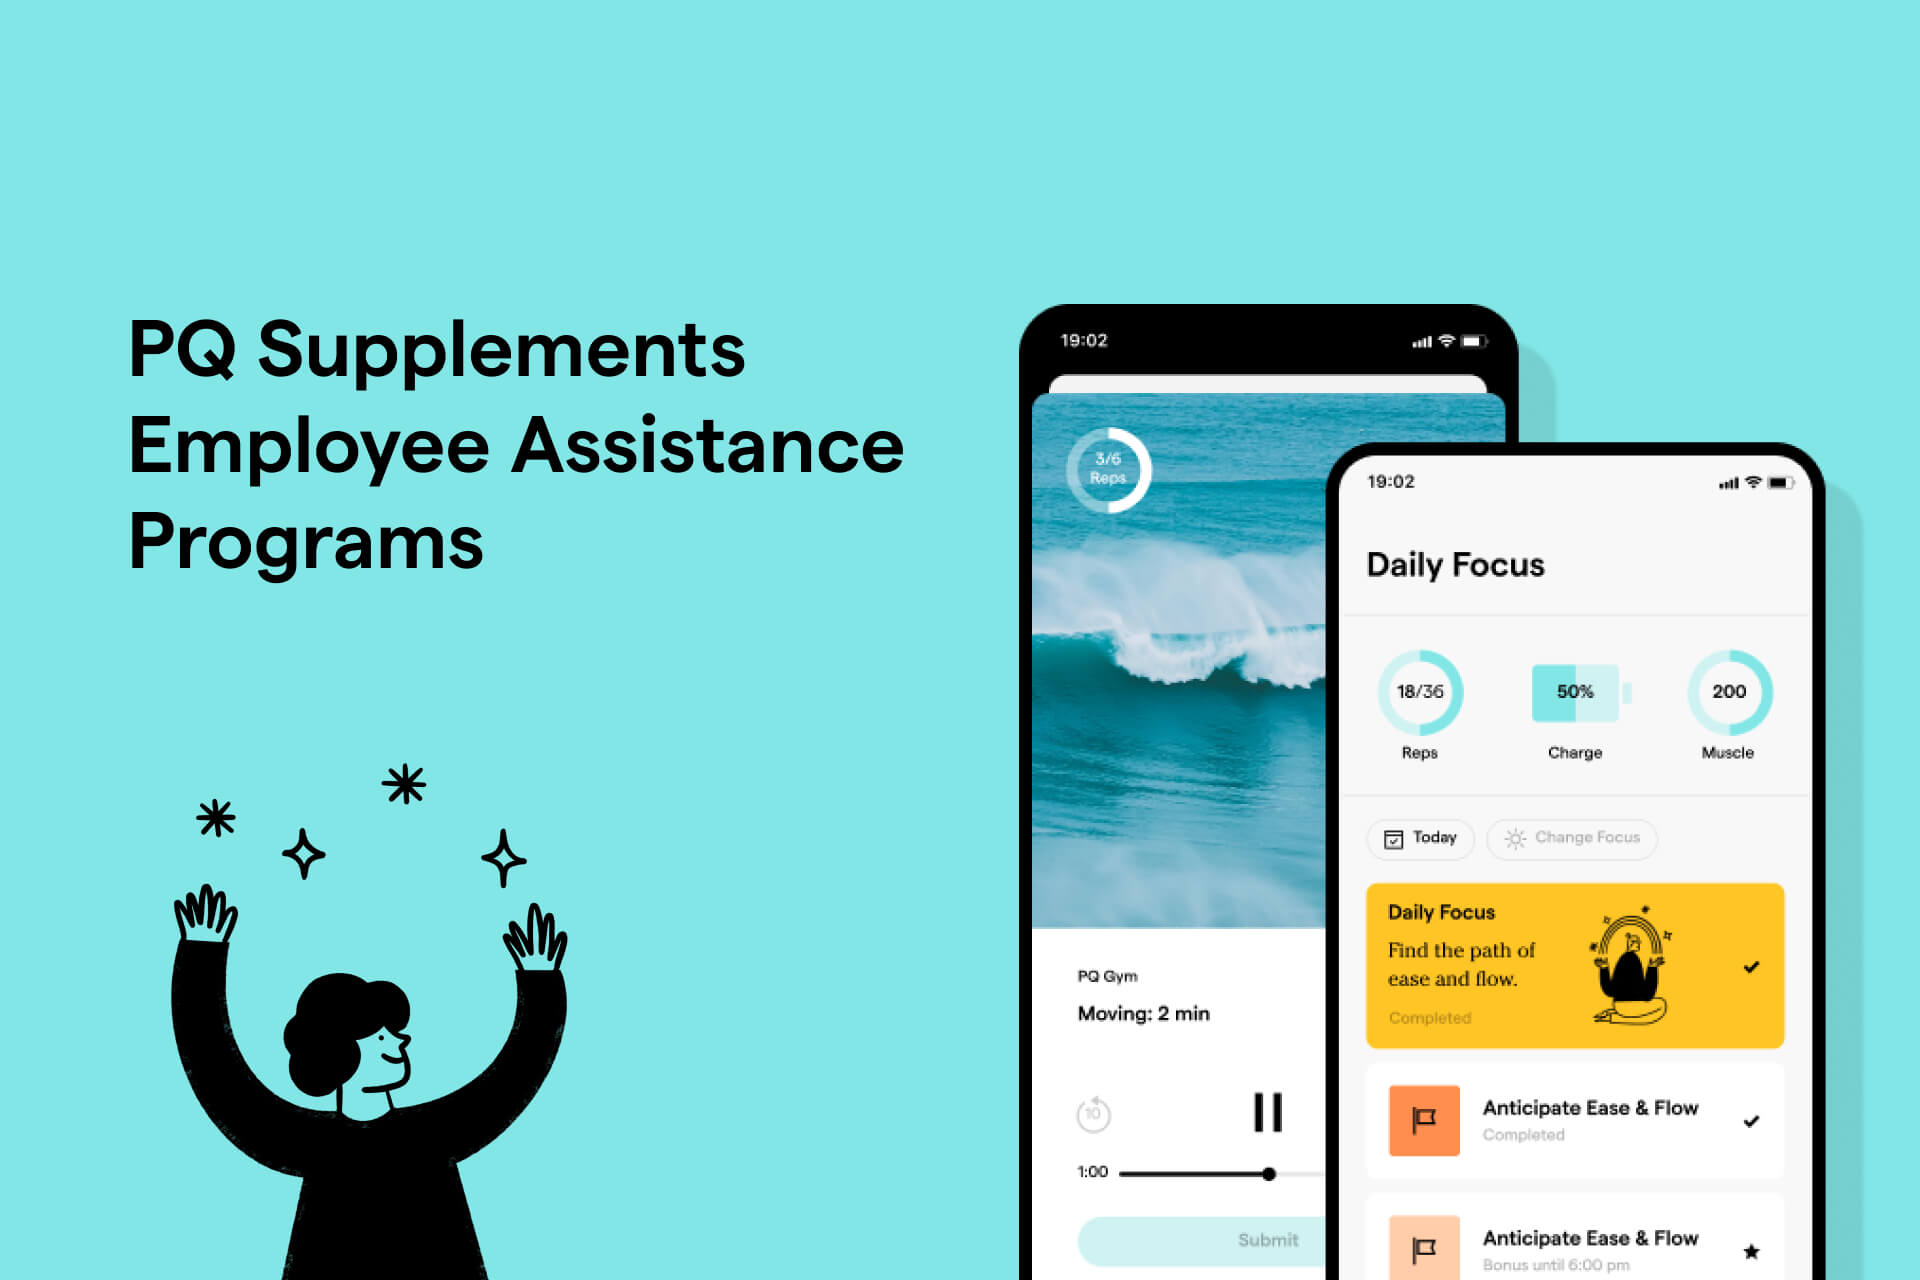 PQ Supplements Employee Assistance Programs